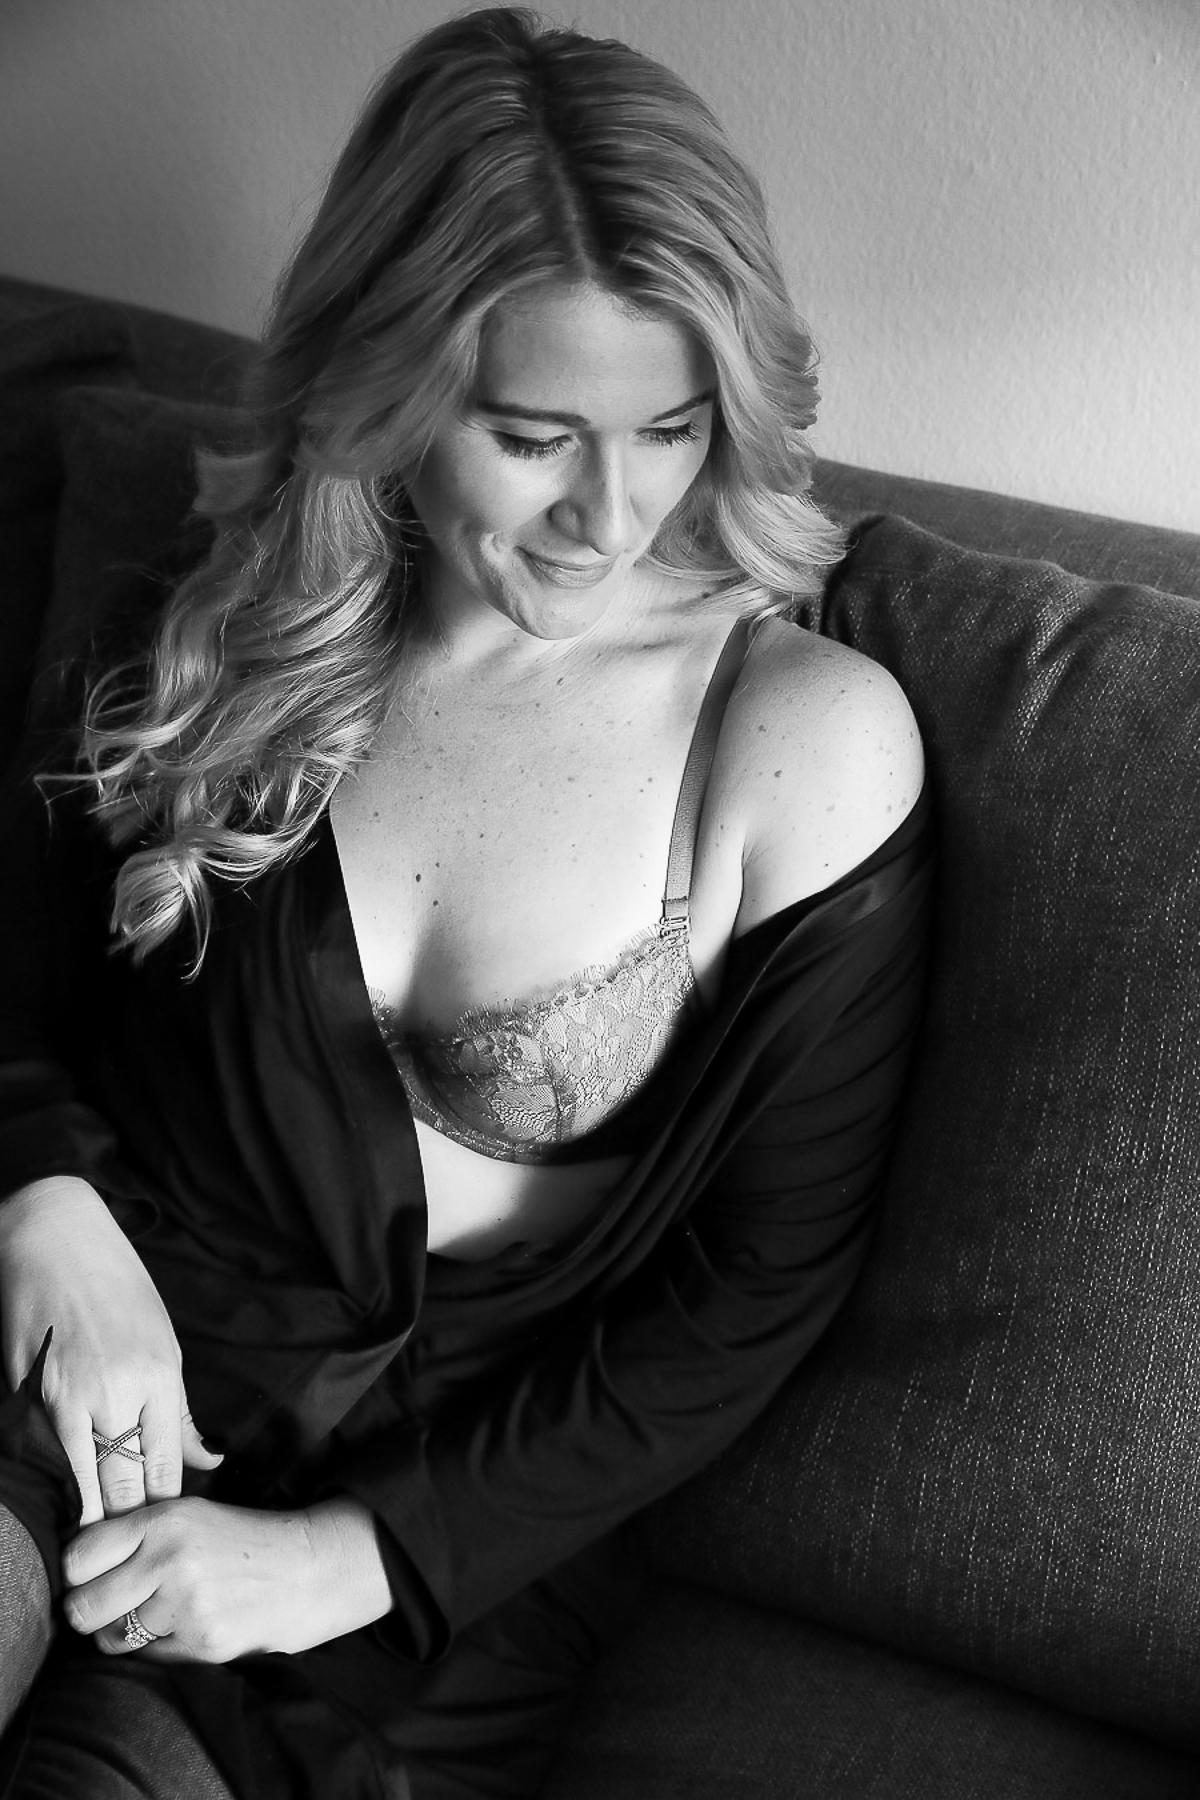 Luci on Couch in black and white - sustainable undergarments writeup